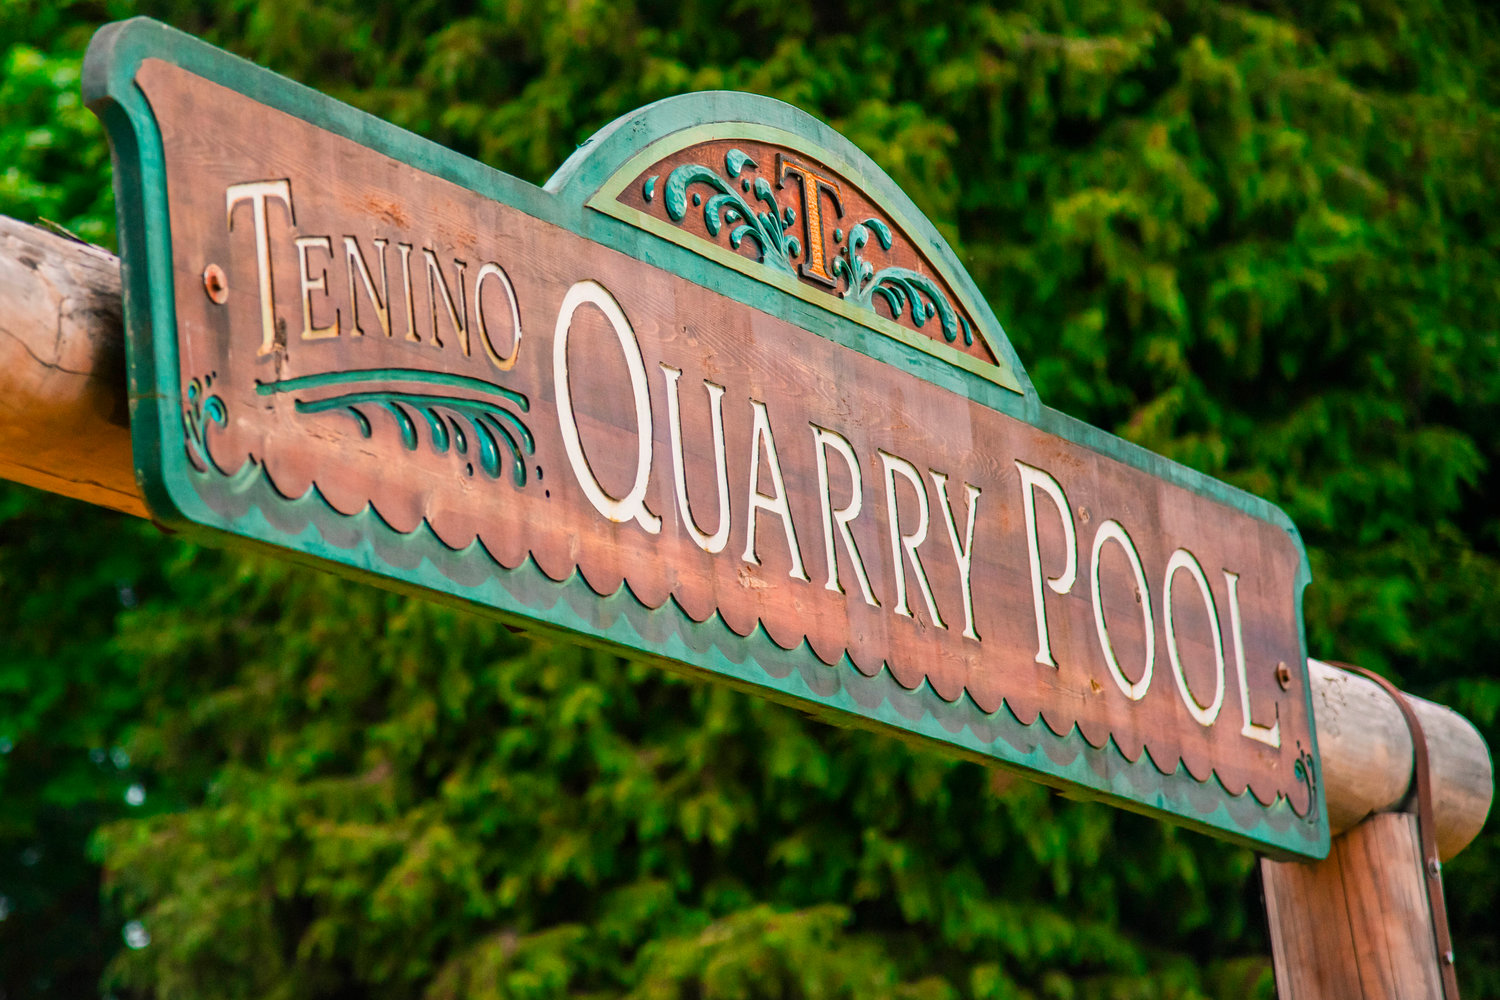 The Quarry Pool is located inside Tenino City Park.